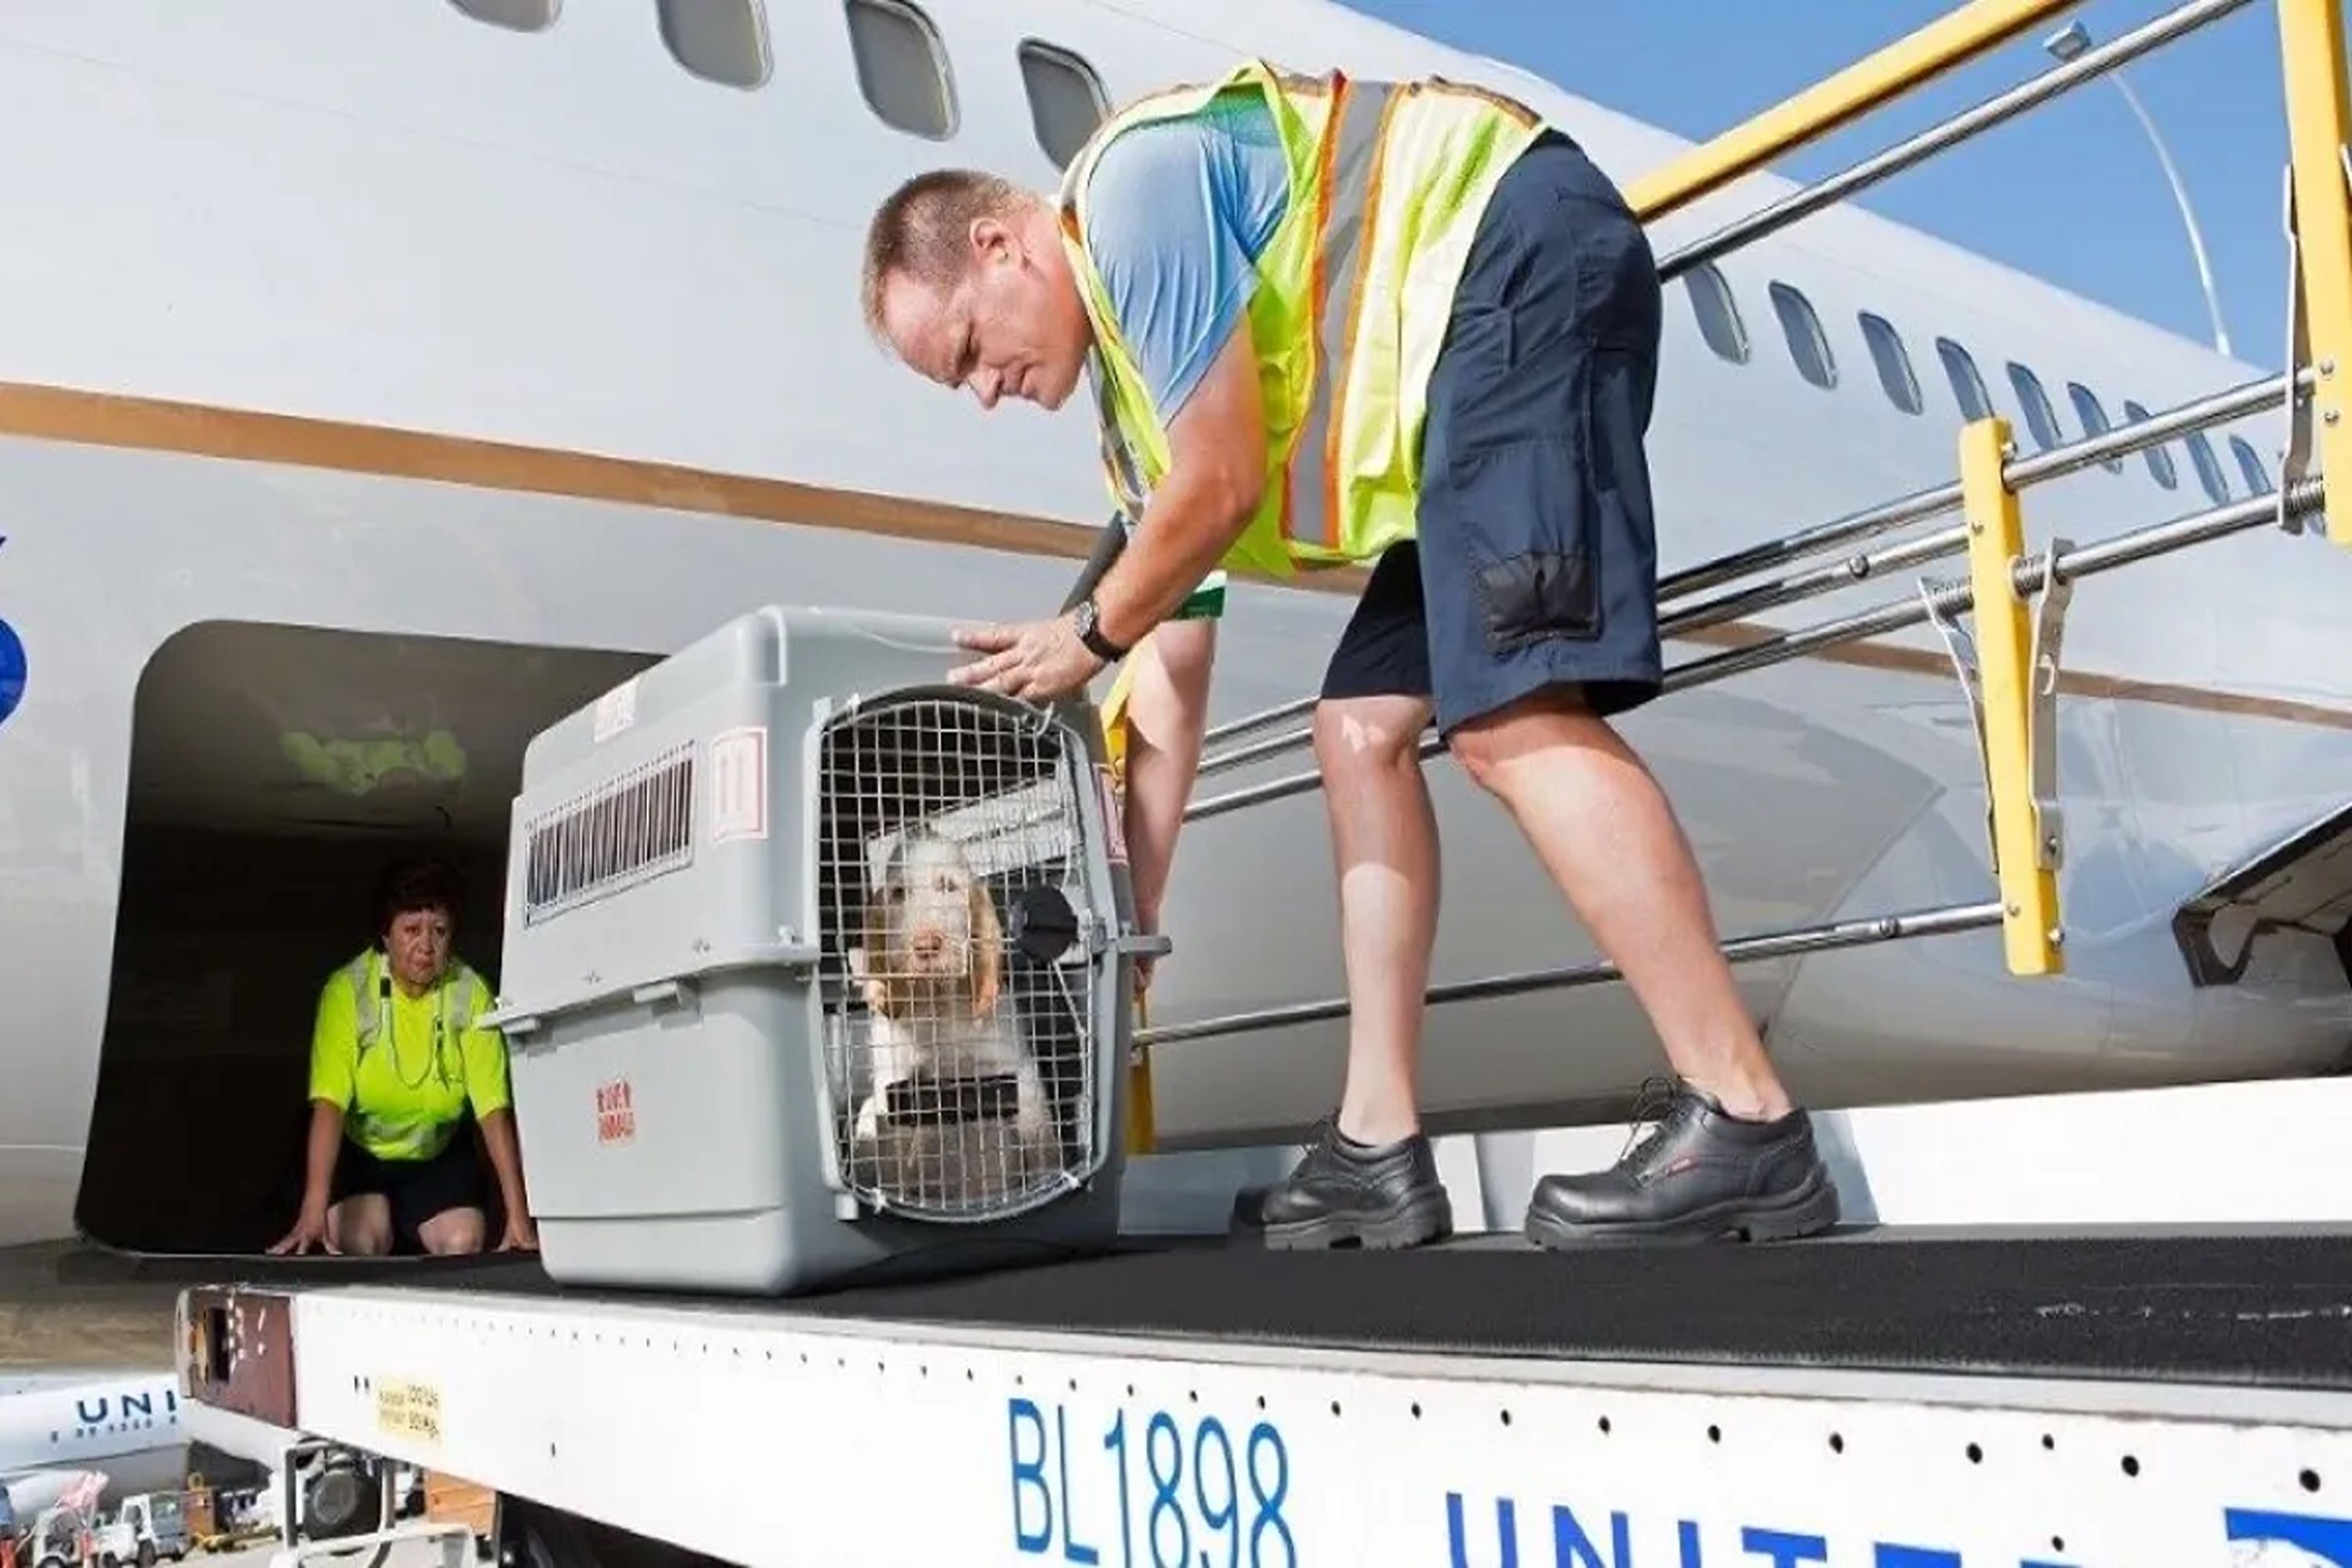 A Pet Being Loaded Into United Airlines Cargo Hold.